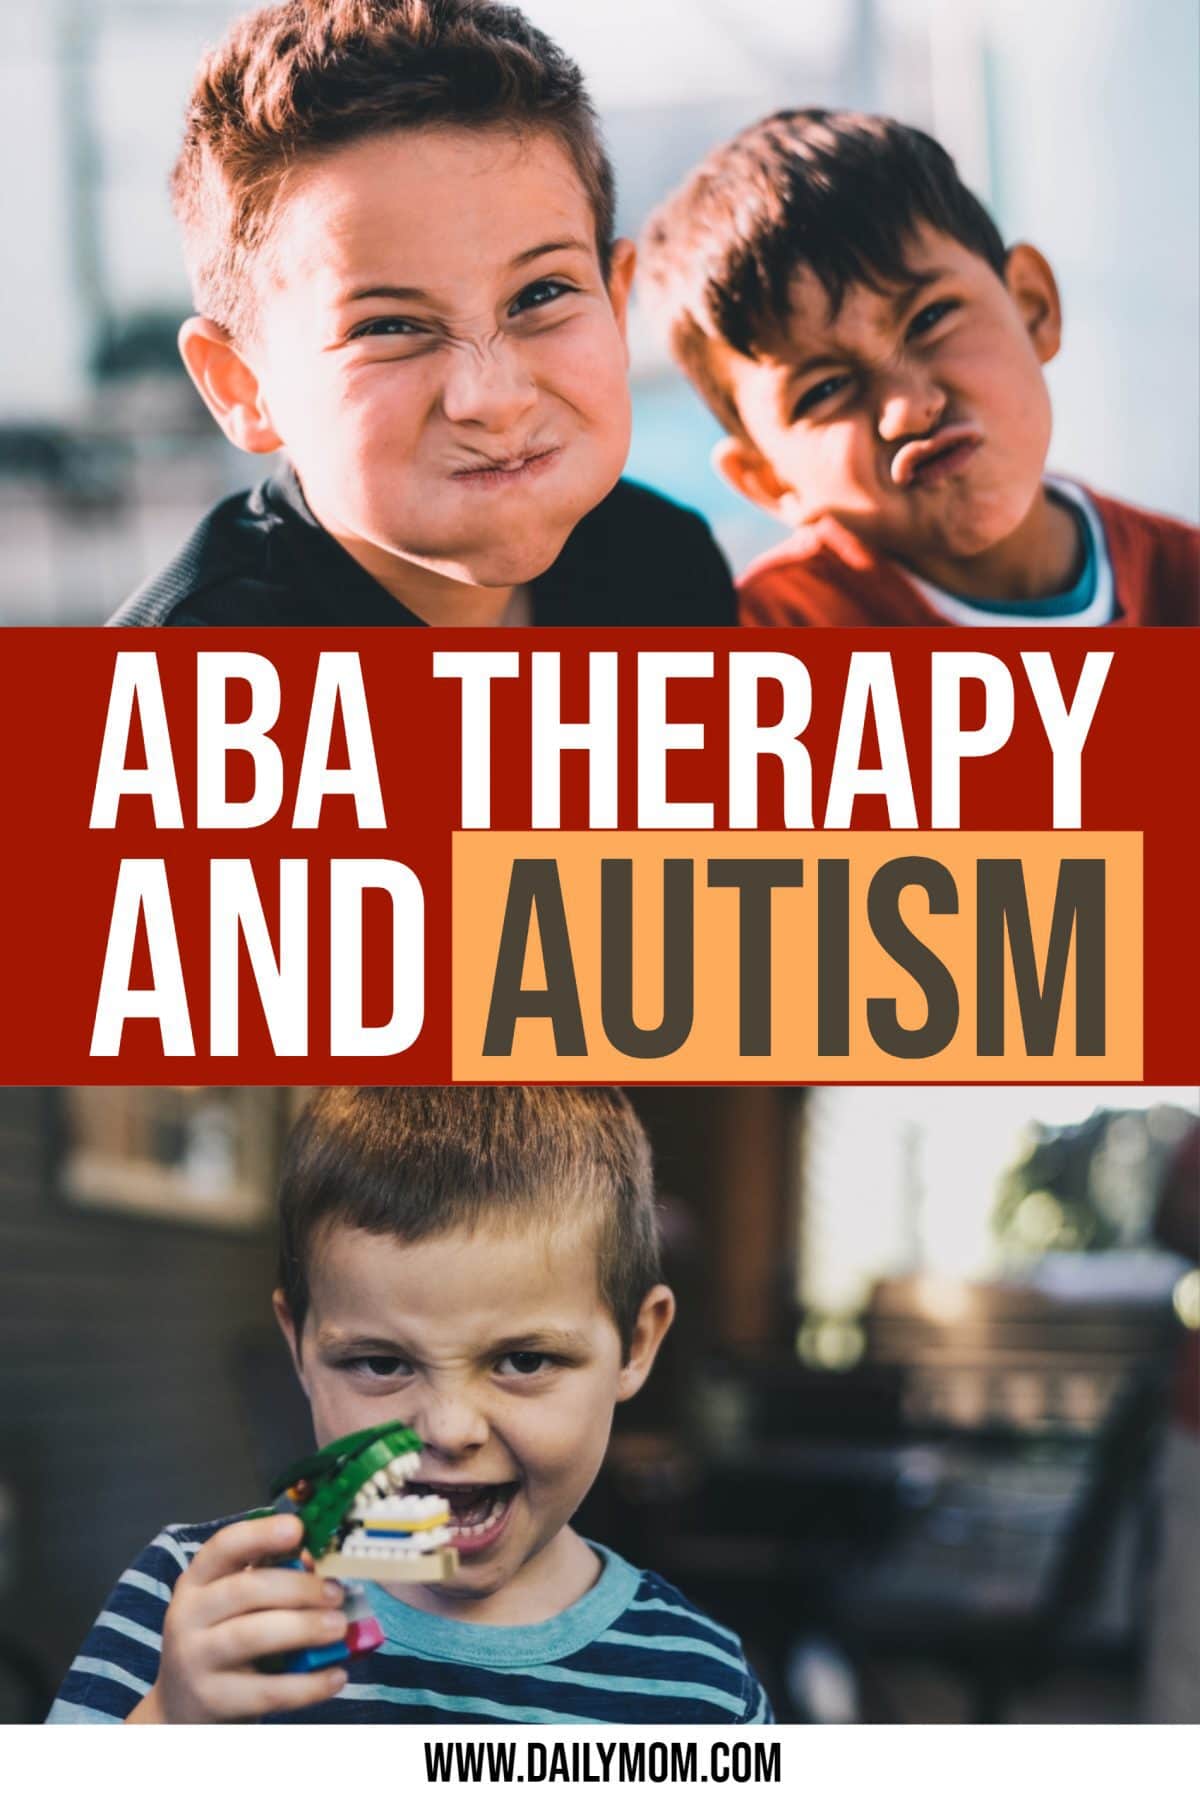 Daily Mom Parent Portal What Is Aba Therapy